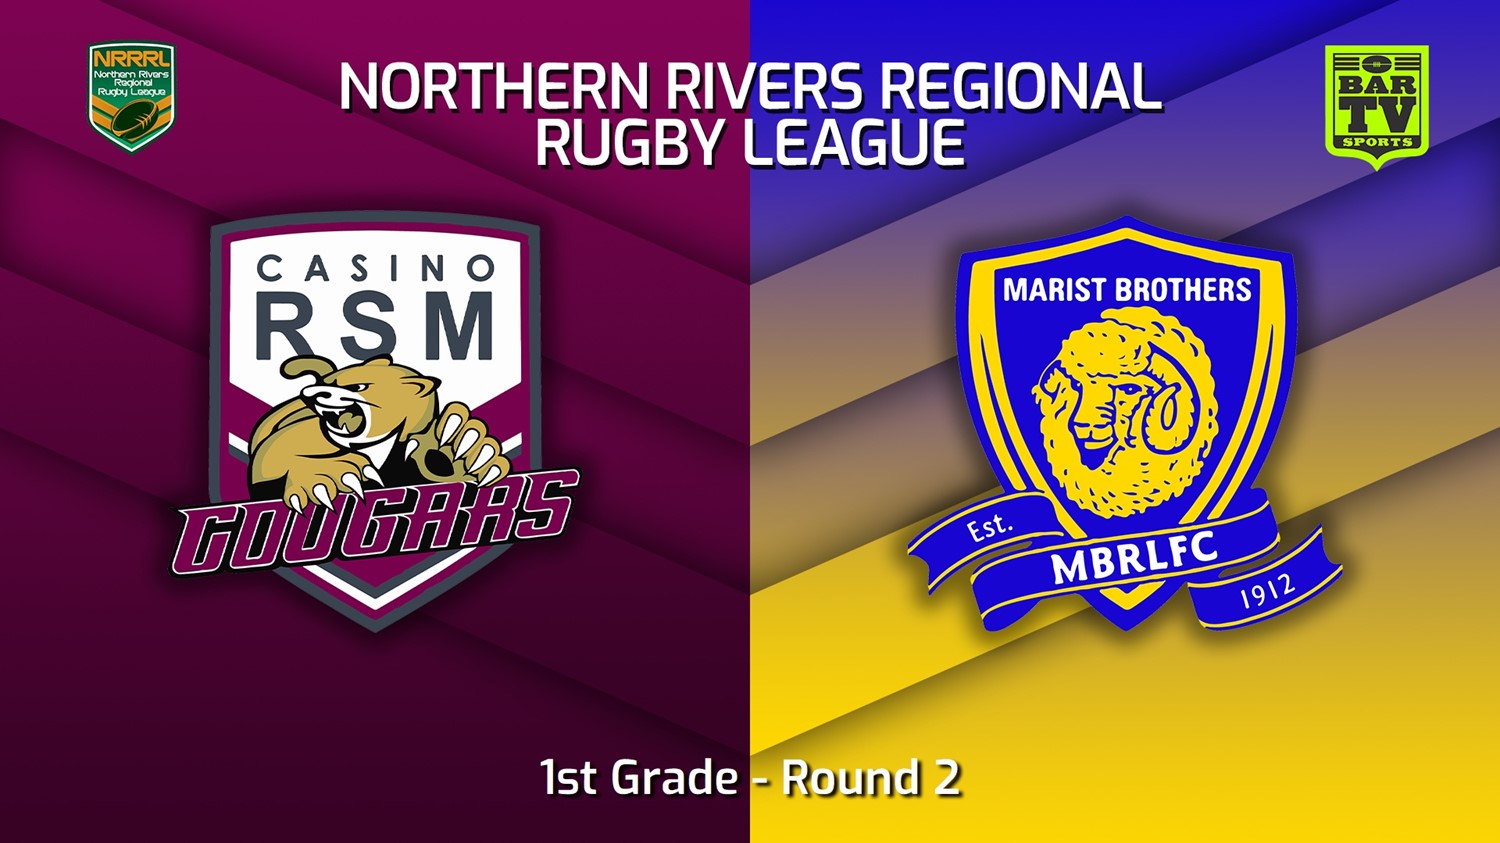 230423-Northern Rivers Round 2 - 1st Grade - Casino RSM Cougars v Lismore Marist Brothers Minigame Slate Image